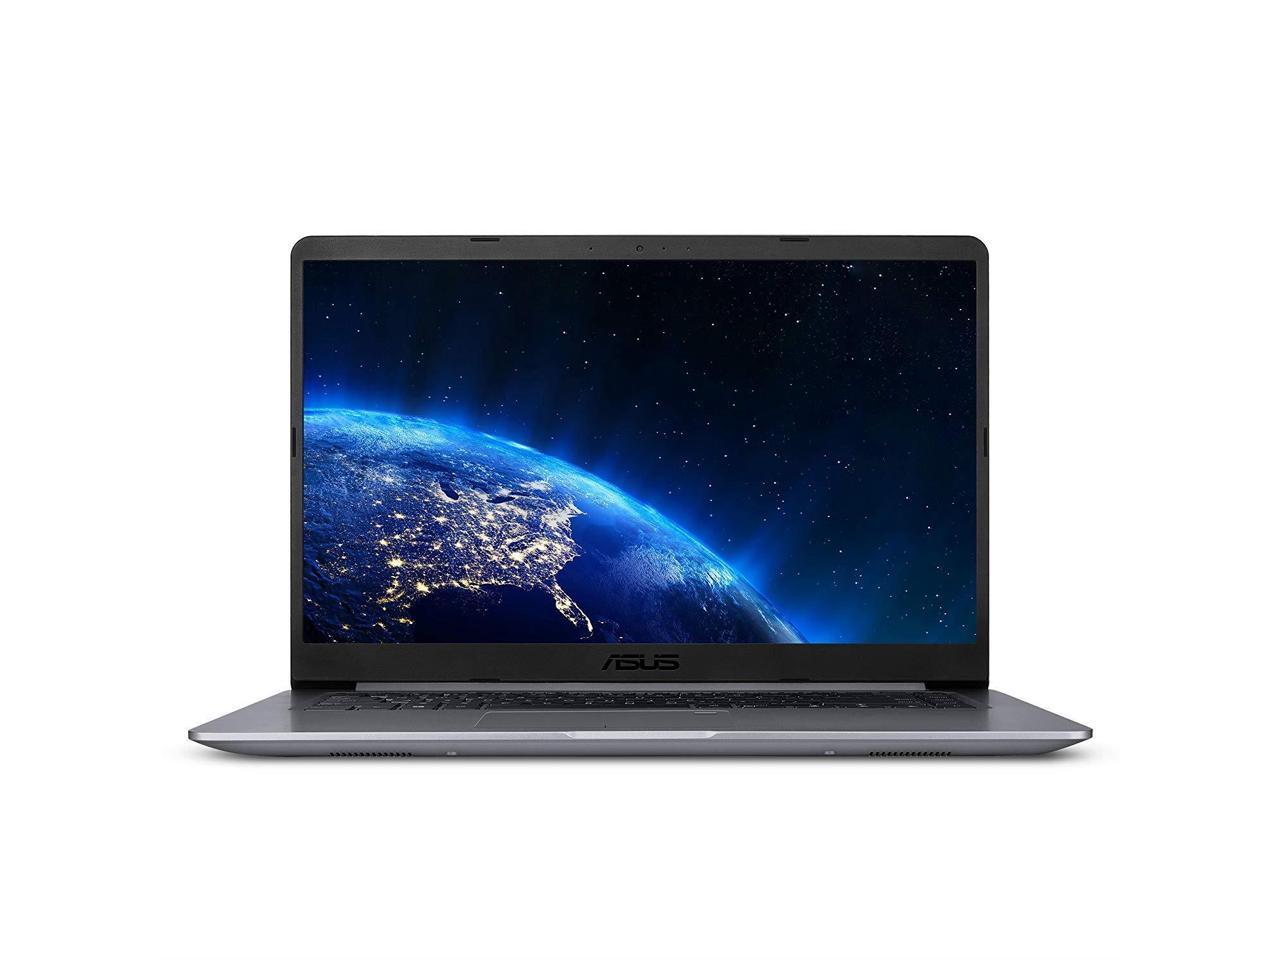 Newest Asus VivoBook Thin & Lightweight Laptop (4G DDR4/128G SSD)|15.6" Full HD(1920x1080) WideView display| AMD Quad Core A12-9720P Processor| Wi-Fi AC|Fingerprint Reader|HDMI |Windows 10 in S Mode